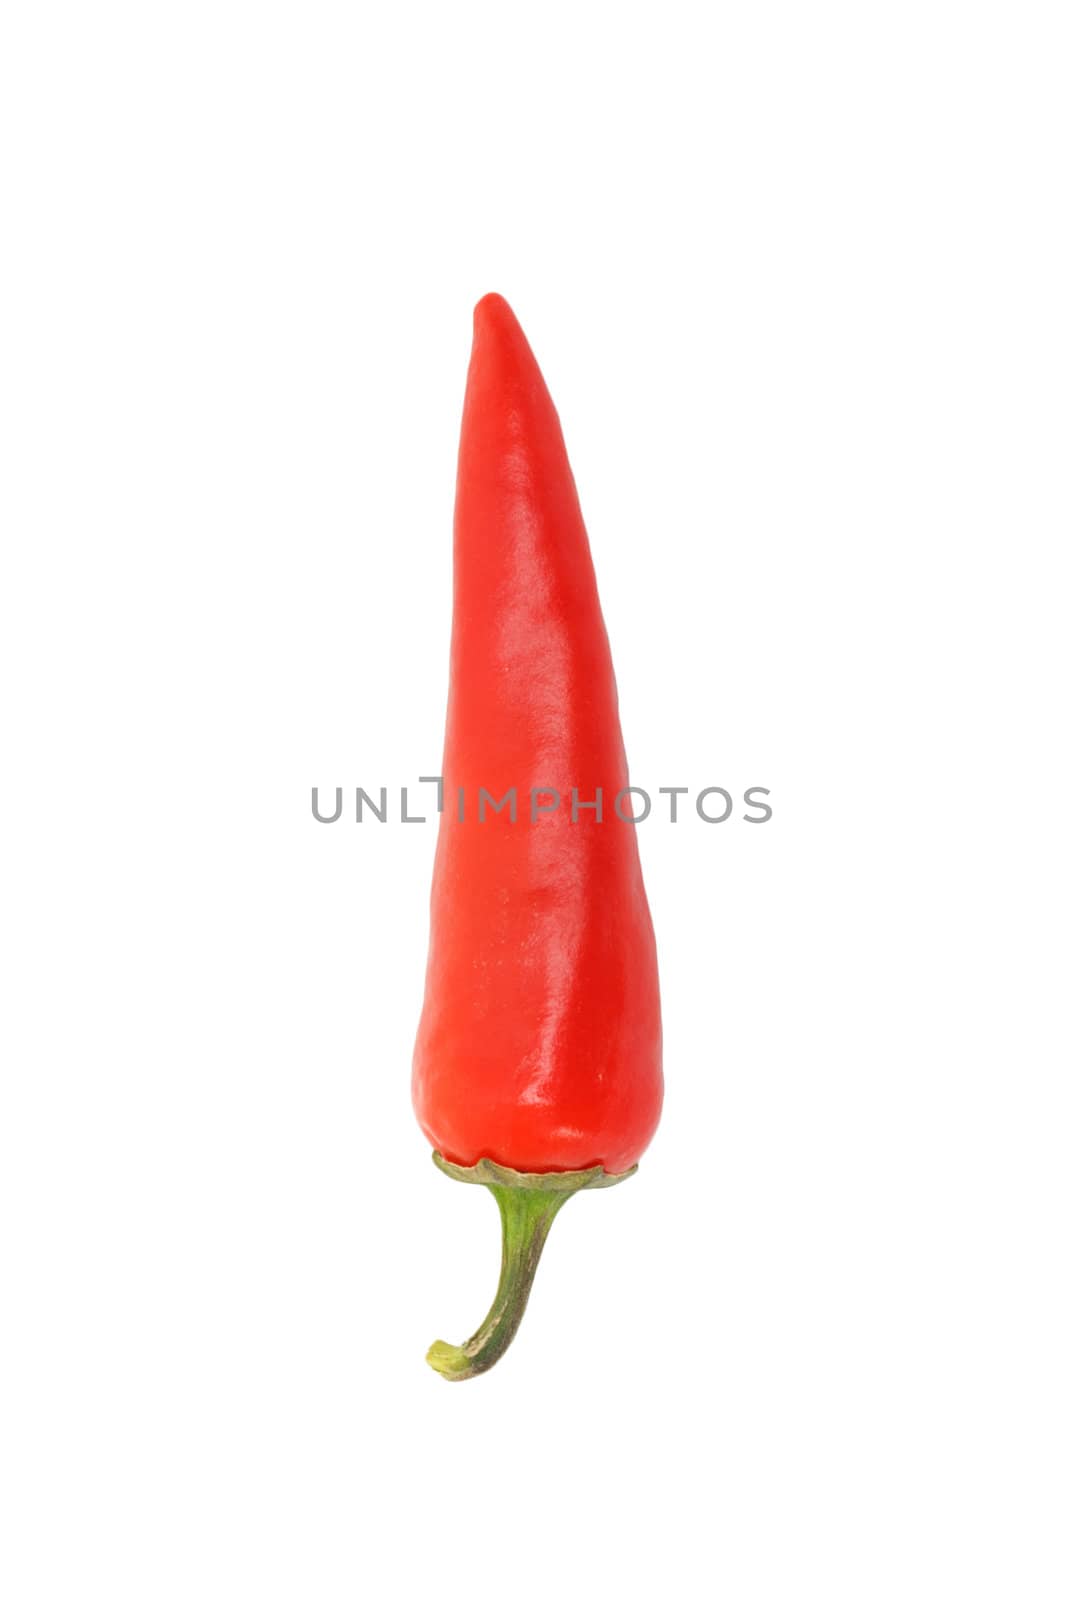 red hot chili pepper isolated on a white background  by schankz